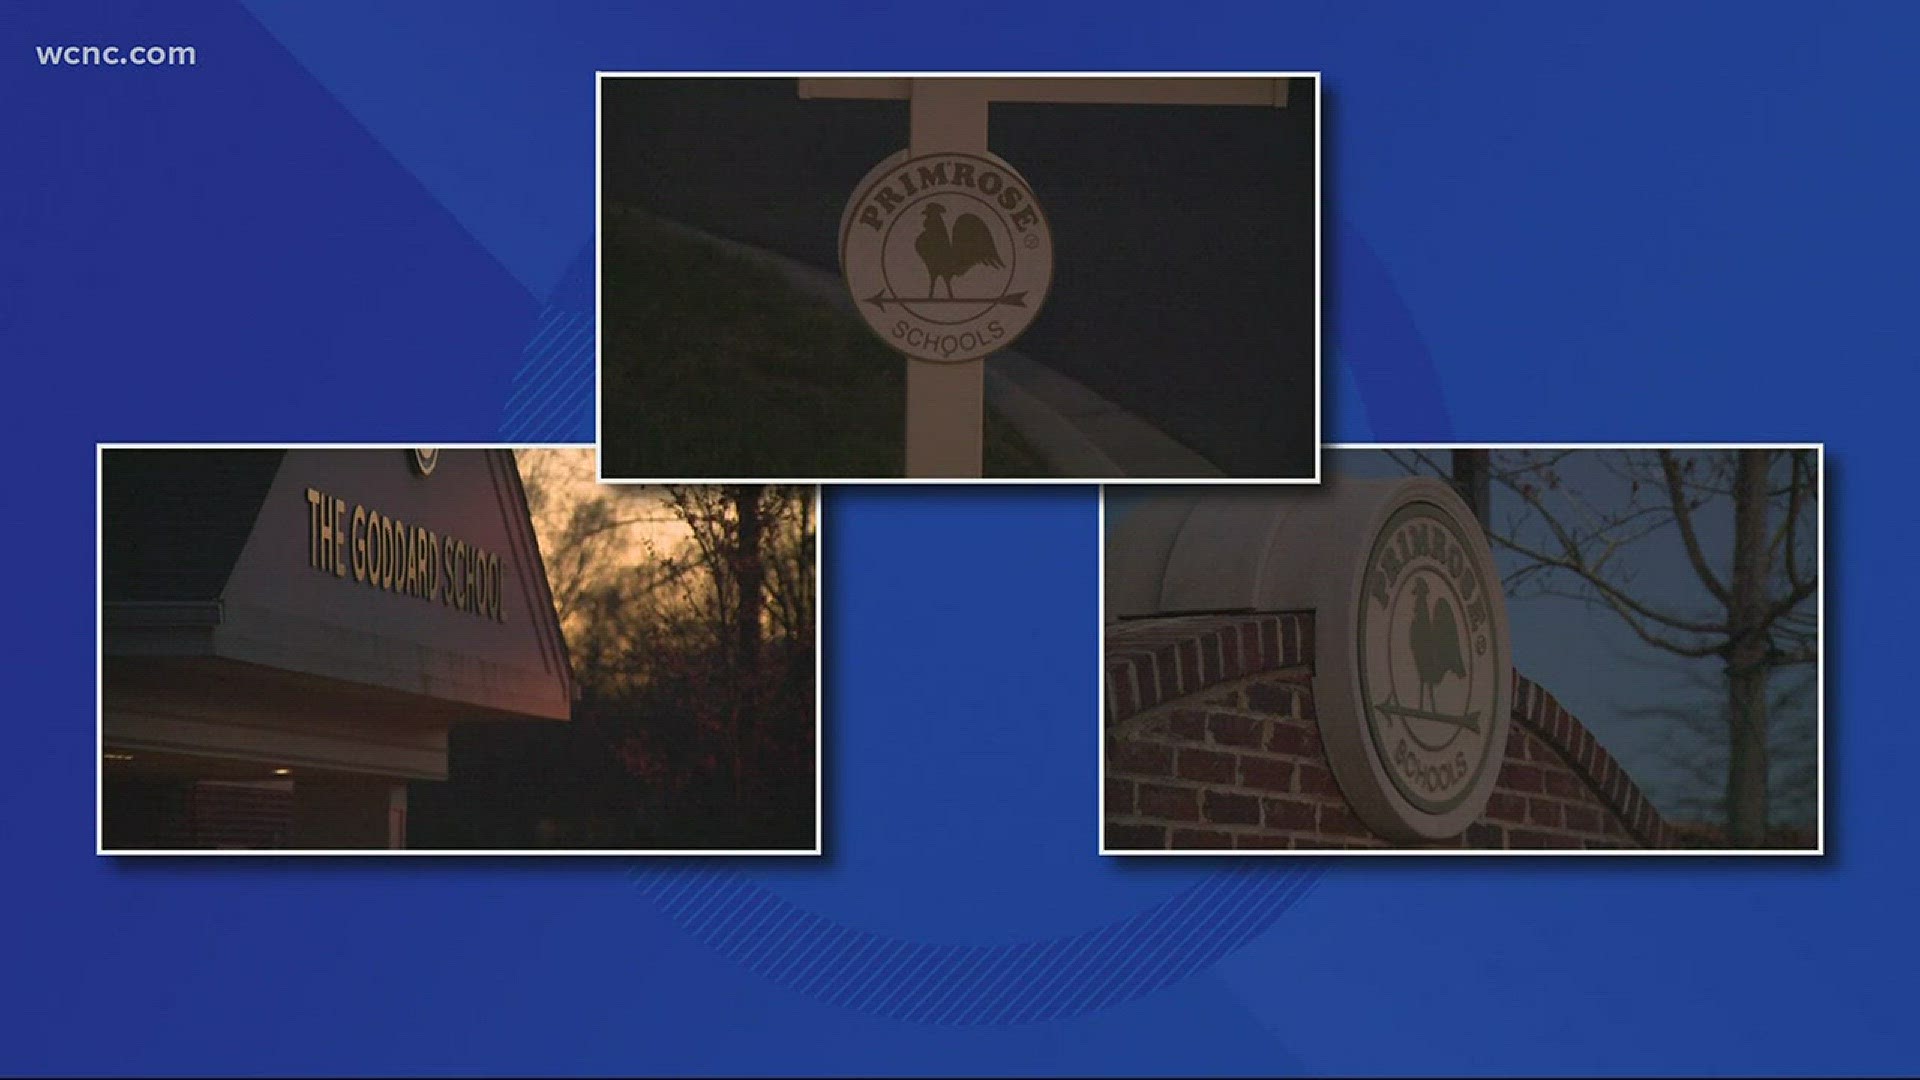 Thieves targeting local day care centers